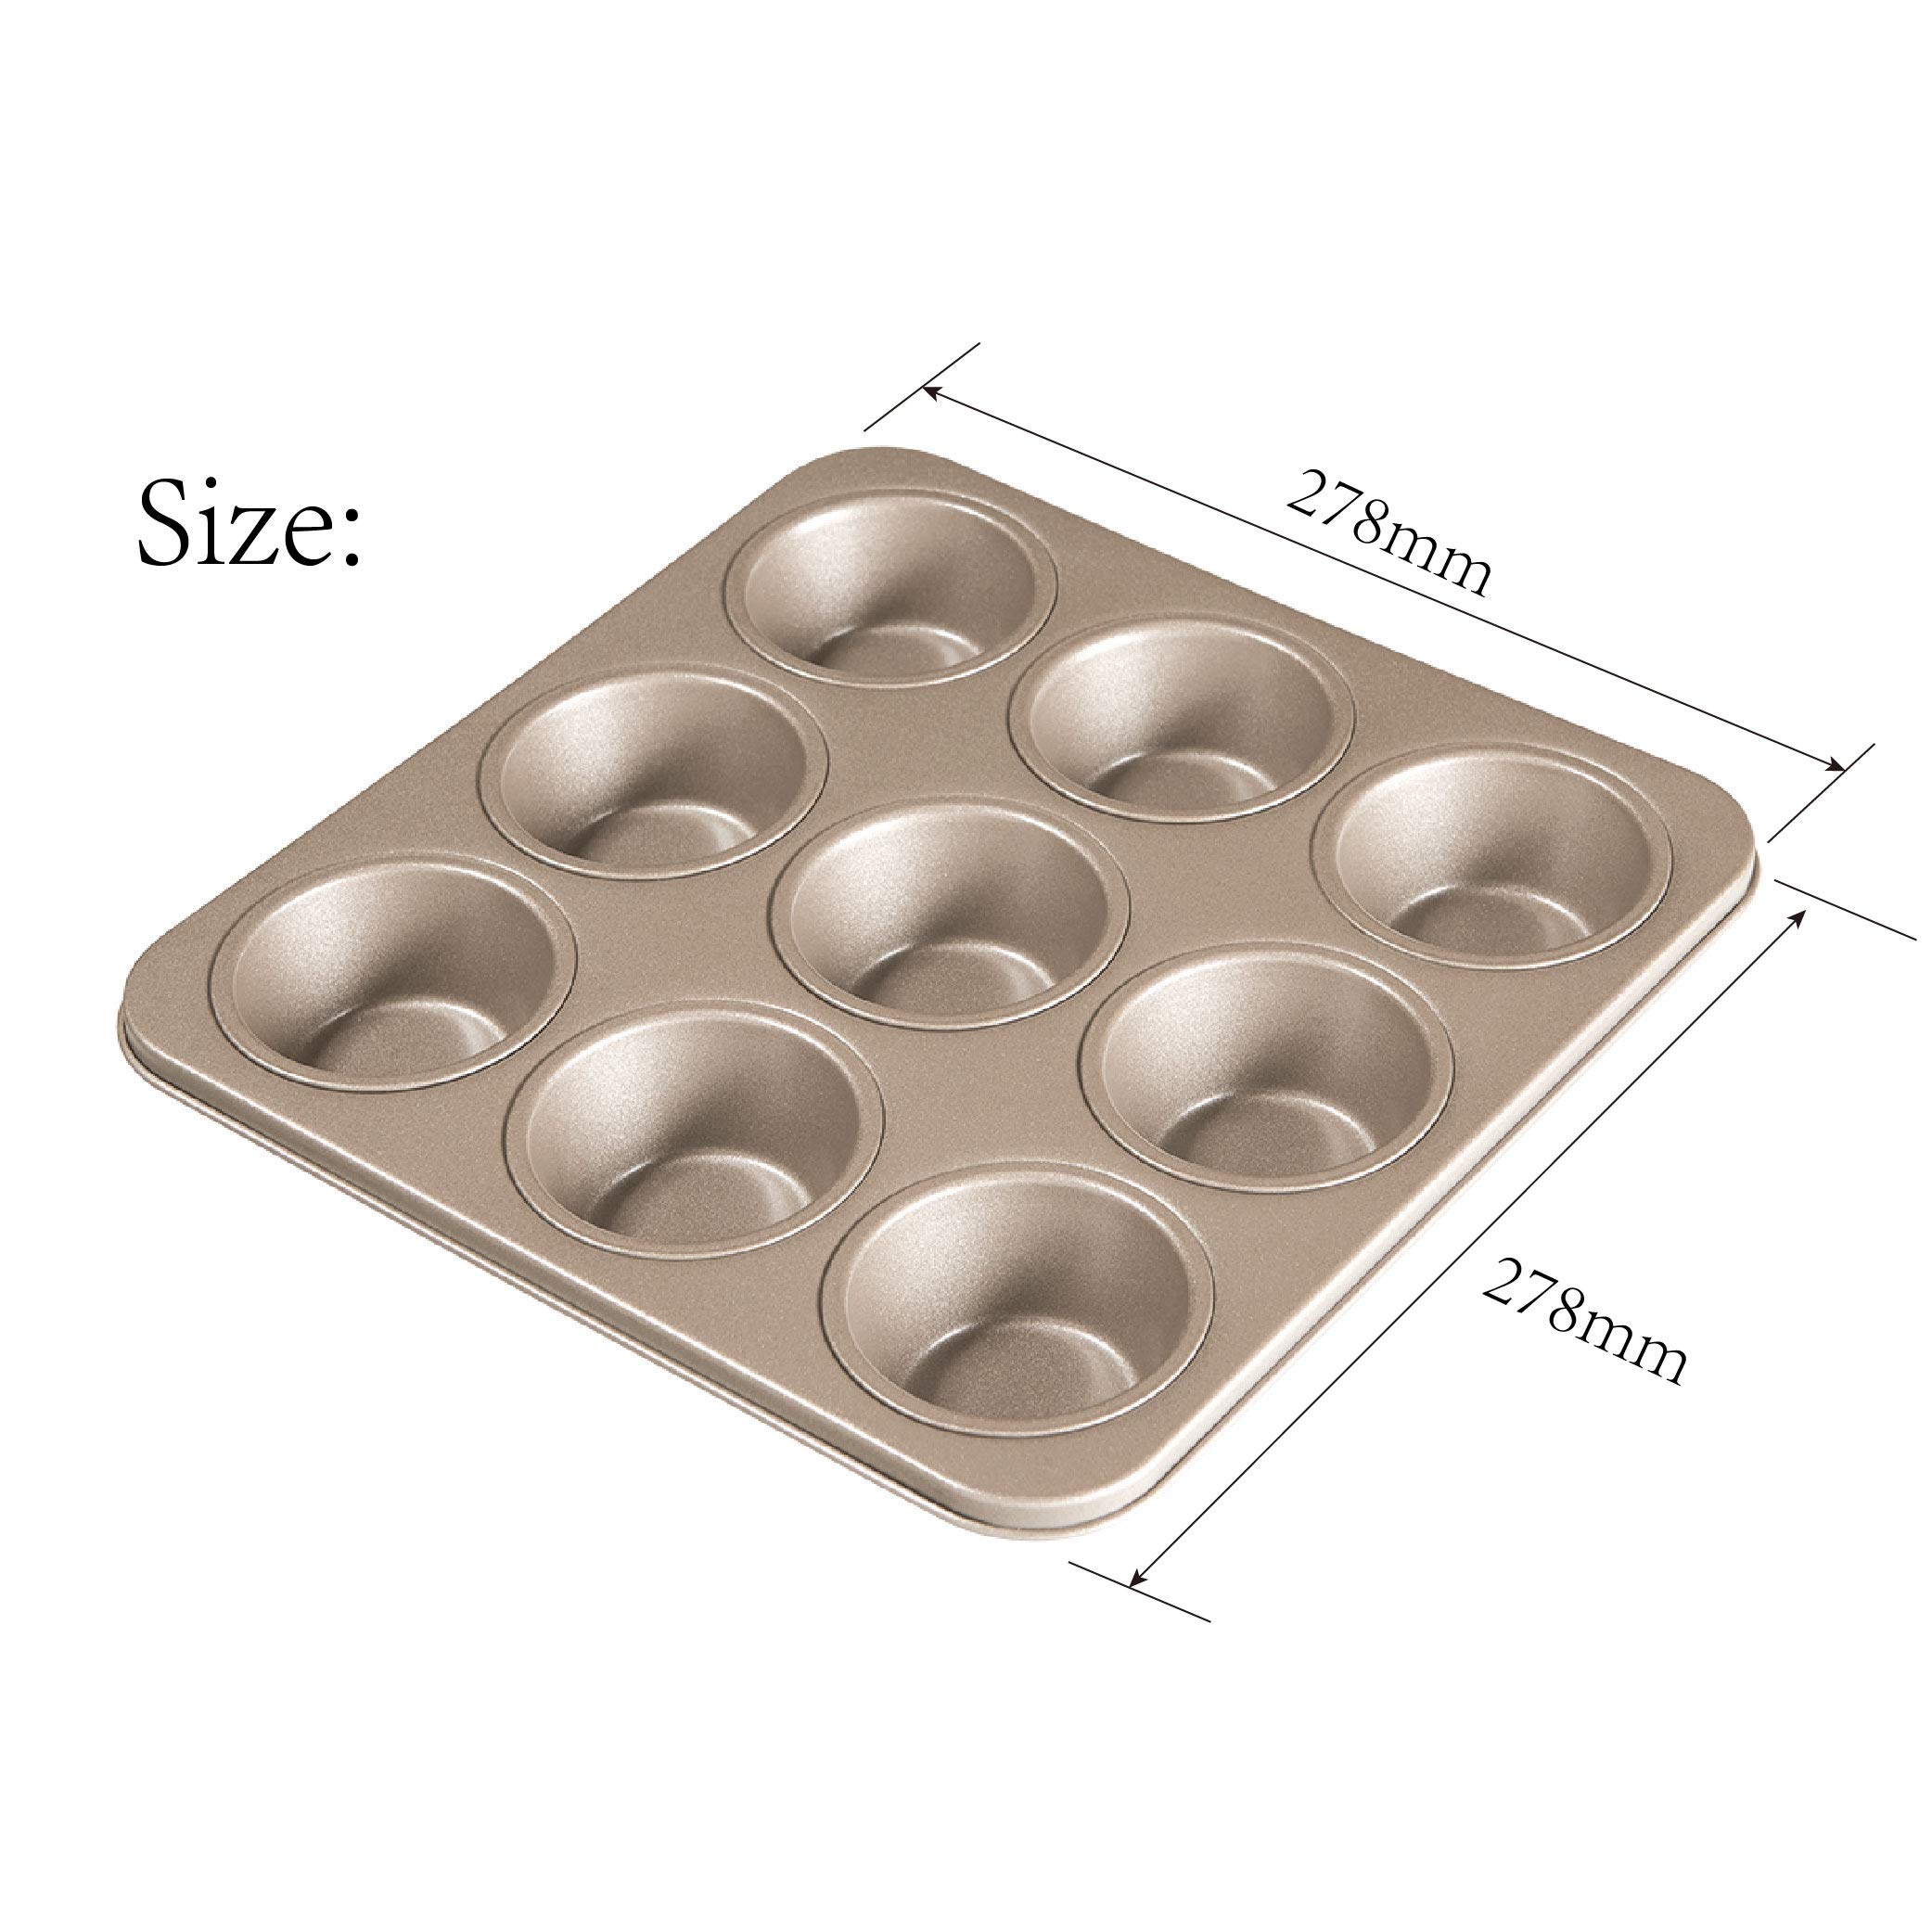 For Bake Carbon Steel Nonstick Bakeware Muffin Pan (9-Cup)